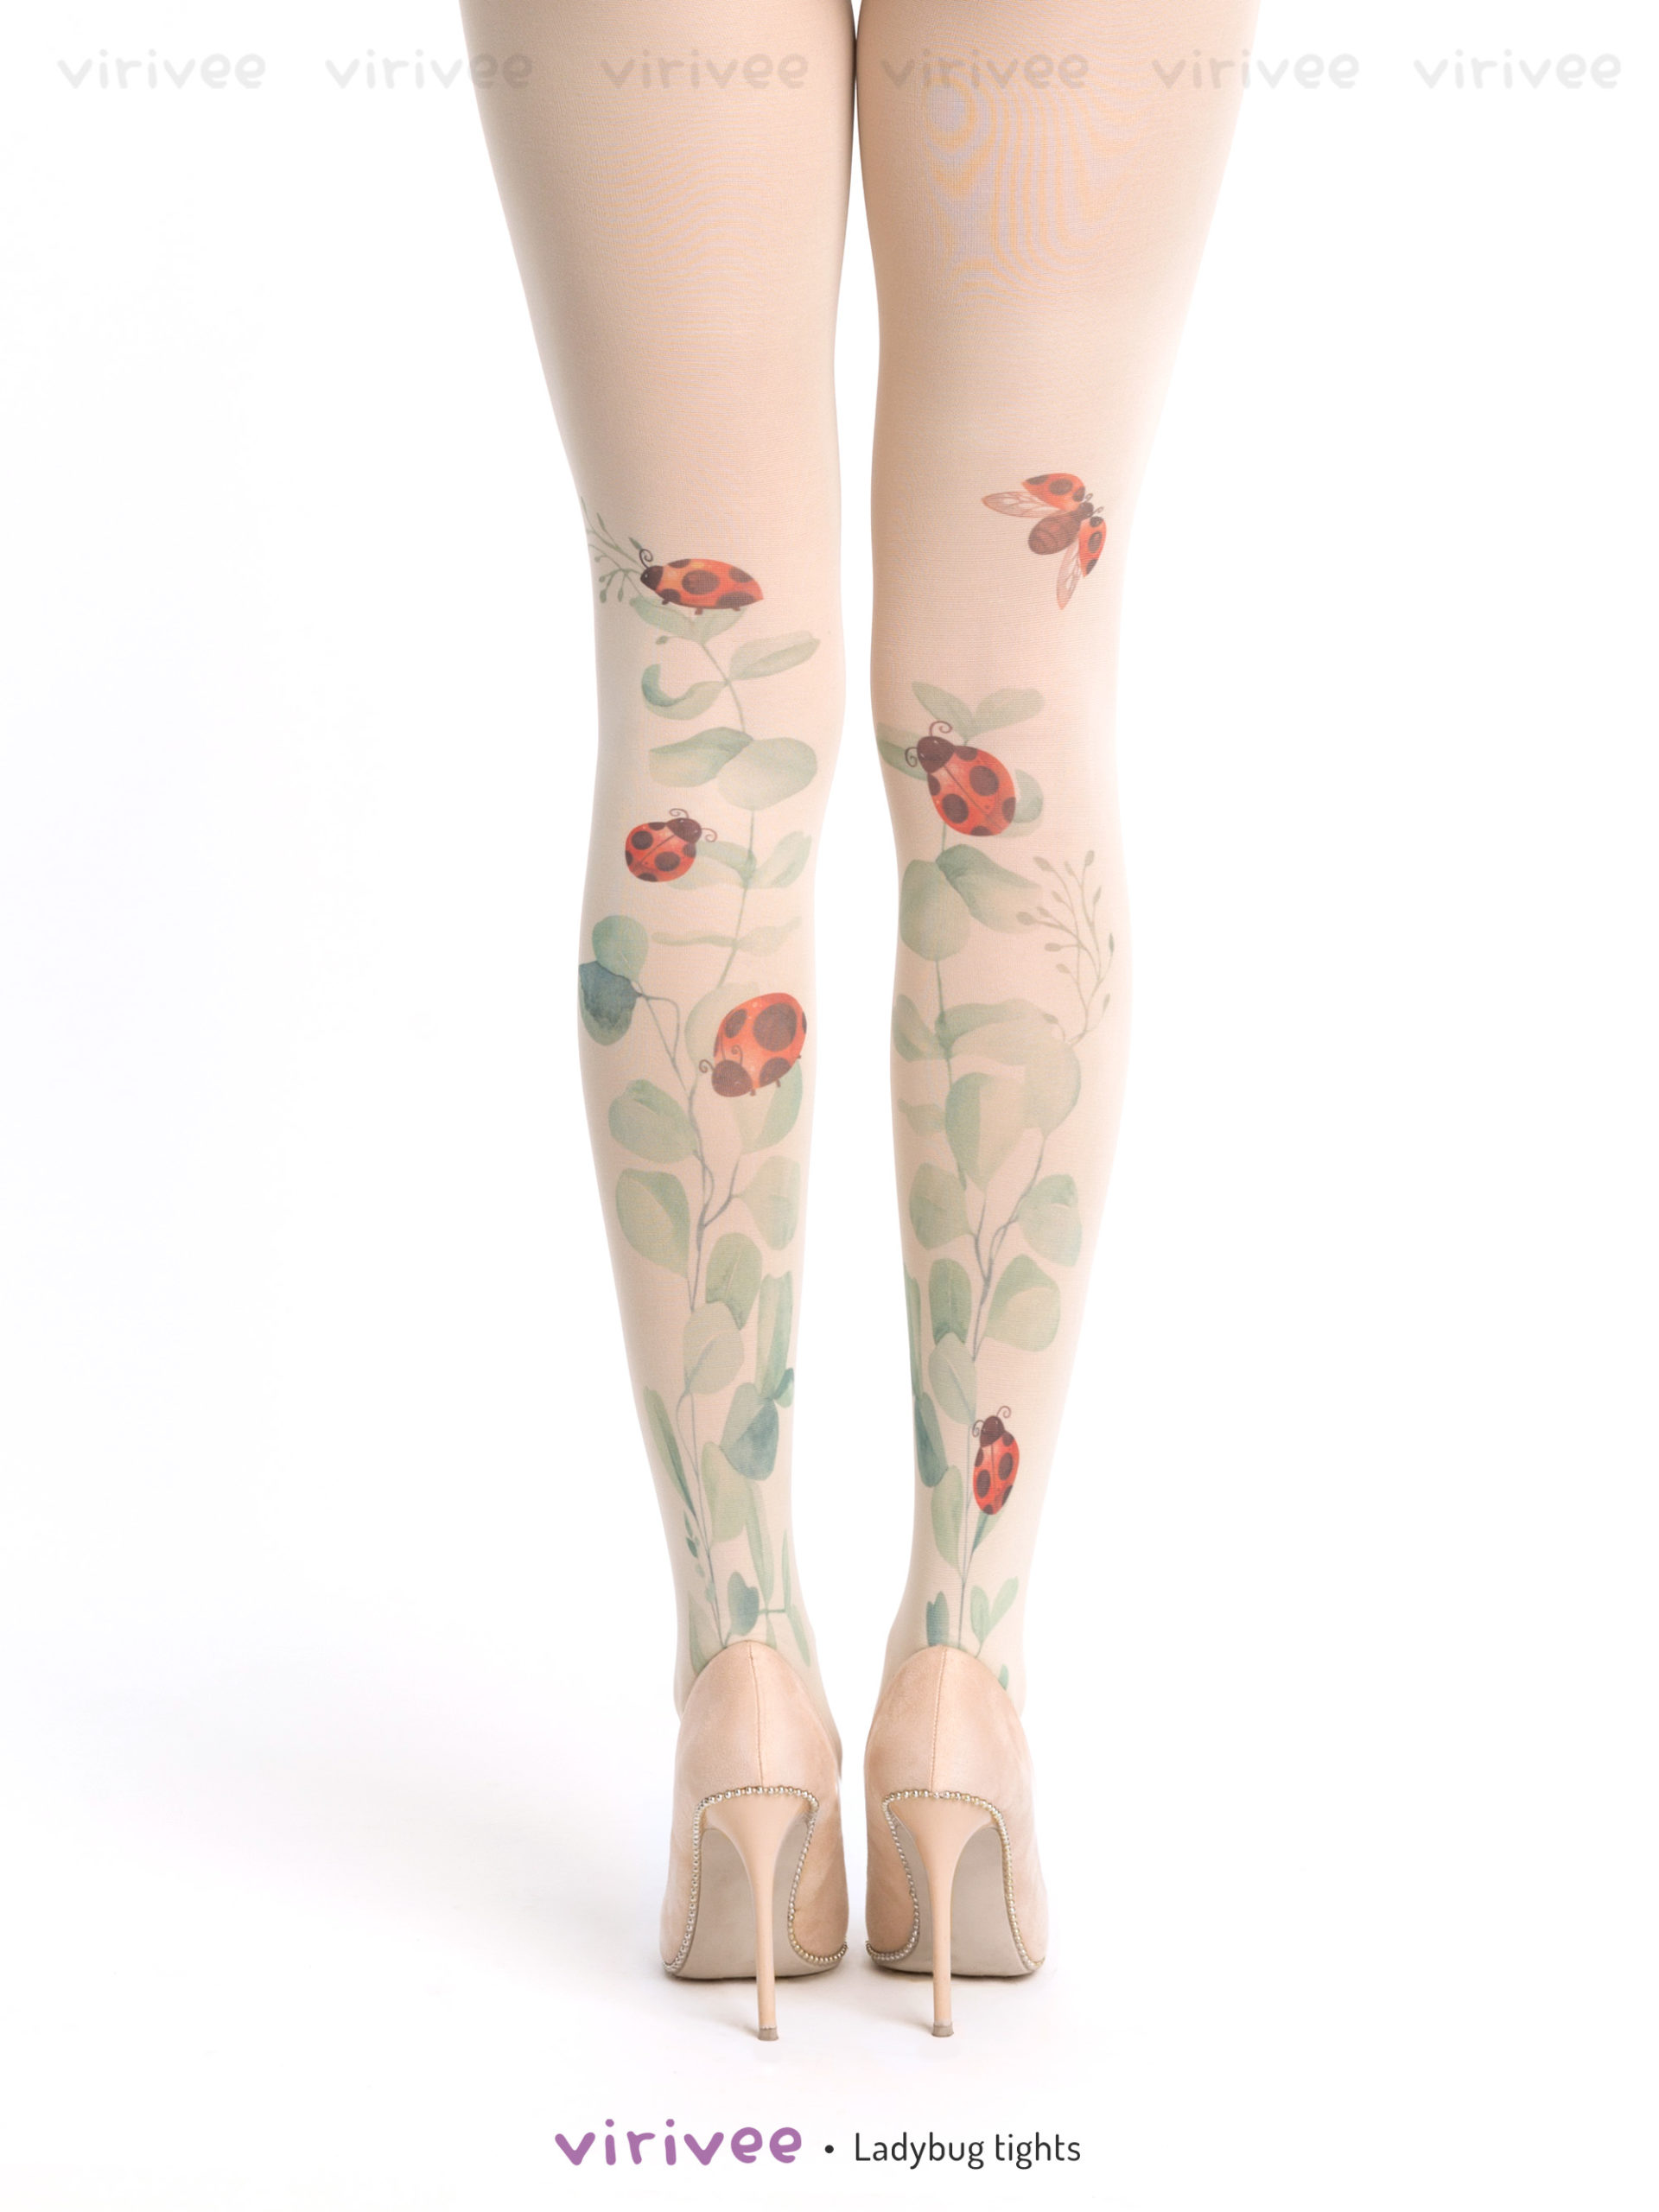 Green meadow tights - Virivee Tights - Unique tights designed and